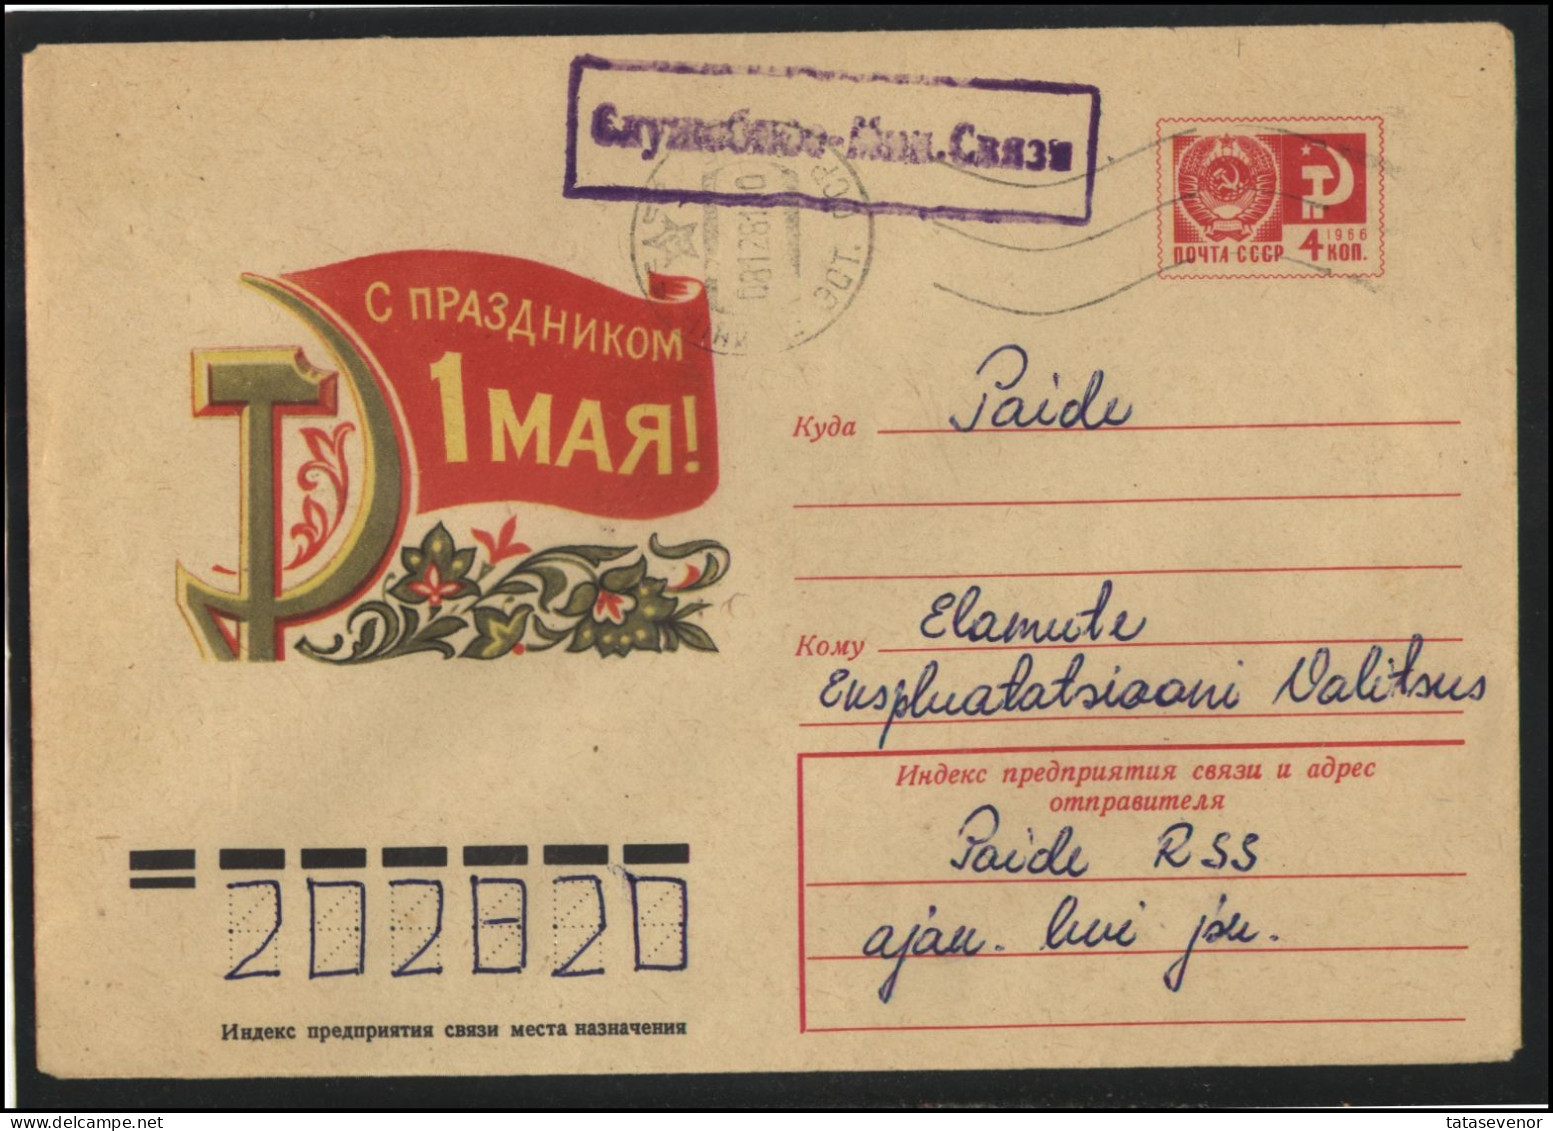 RUSSIA USSR Stationery ESTONIA USED AMBL 1380 PAIDE May Day Celebration - Non Classés